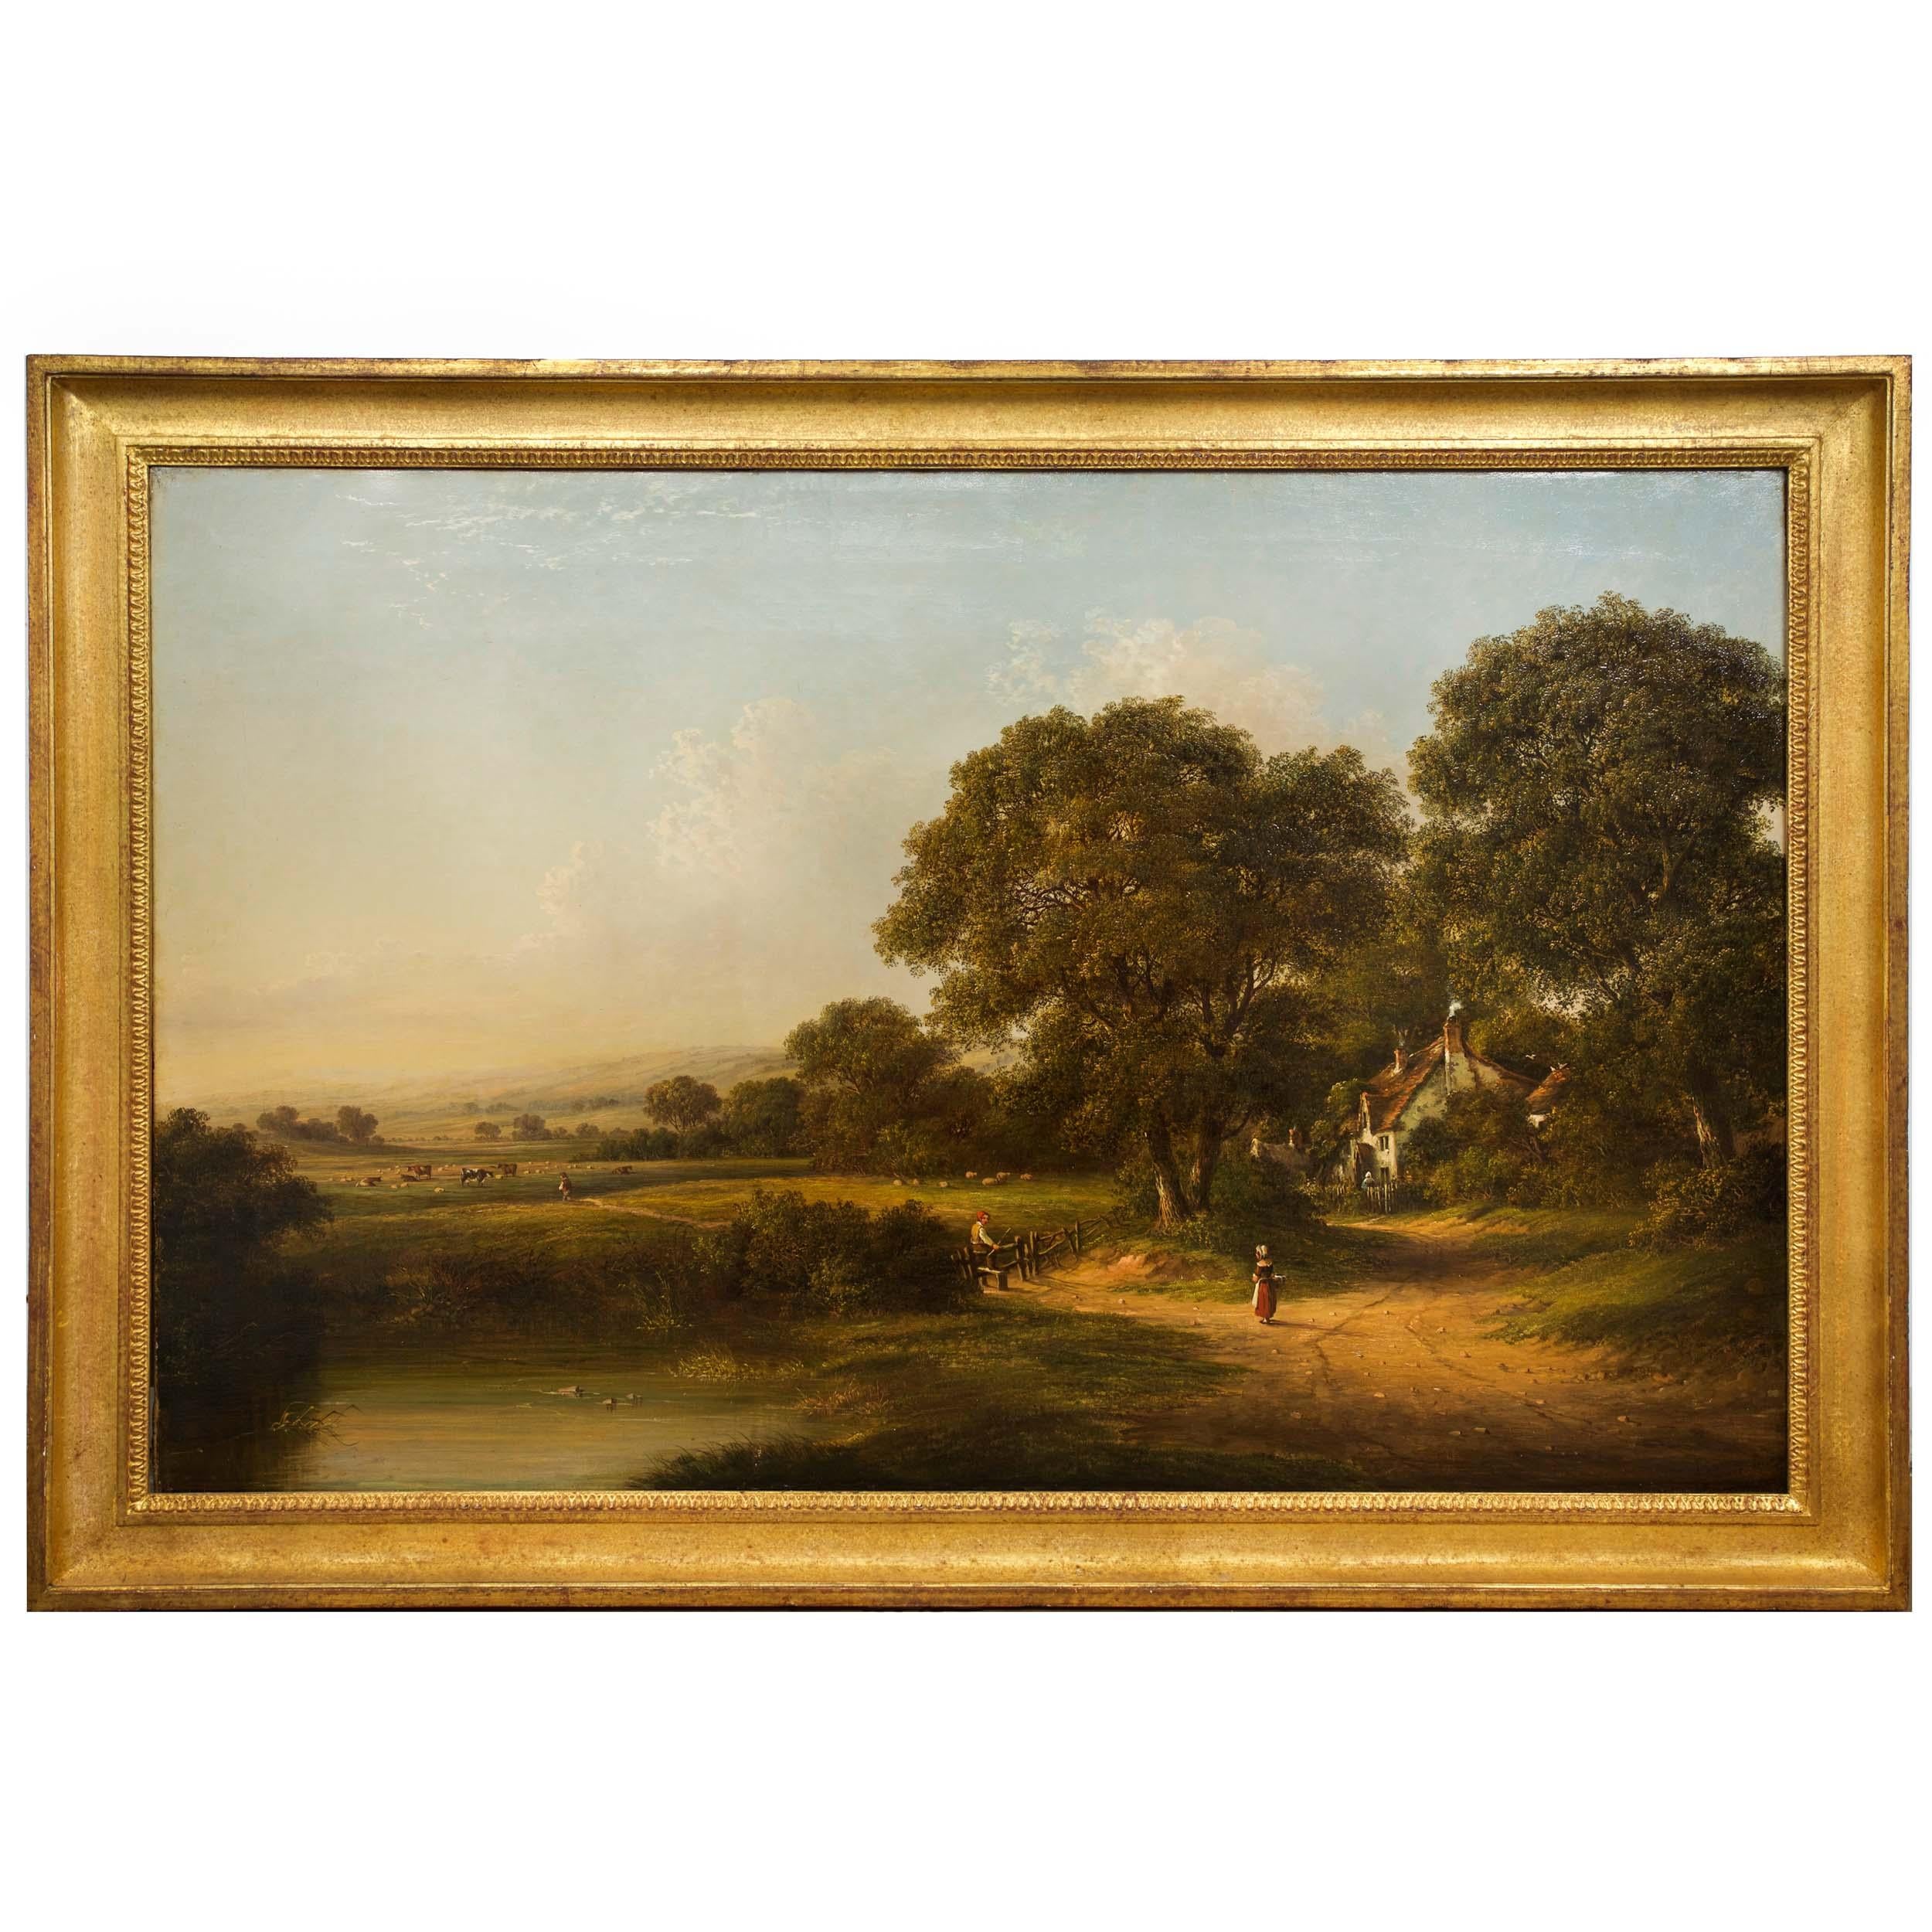 A brilliant evening scene capturing the English countryside as golden hour casts its warm tones across the fields and hills into the distance, the work has a most pleasing and consistent palette of balanced colors across the complex space. It is a